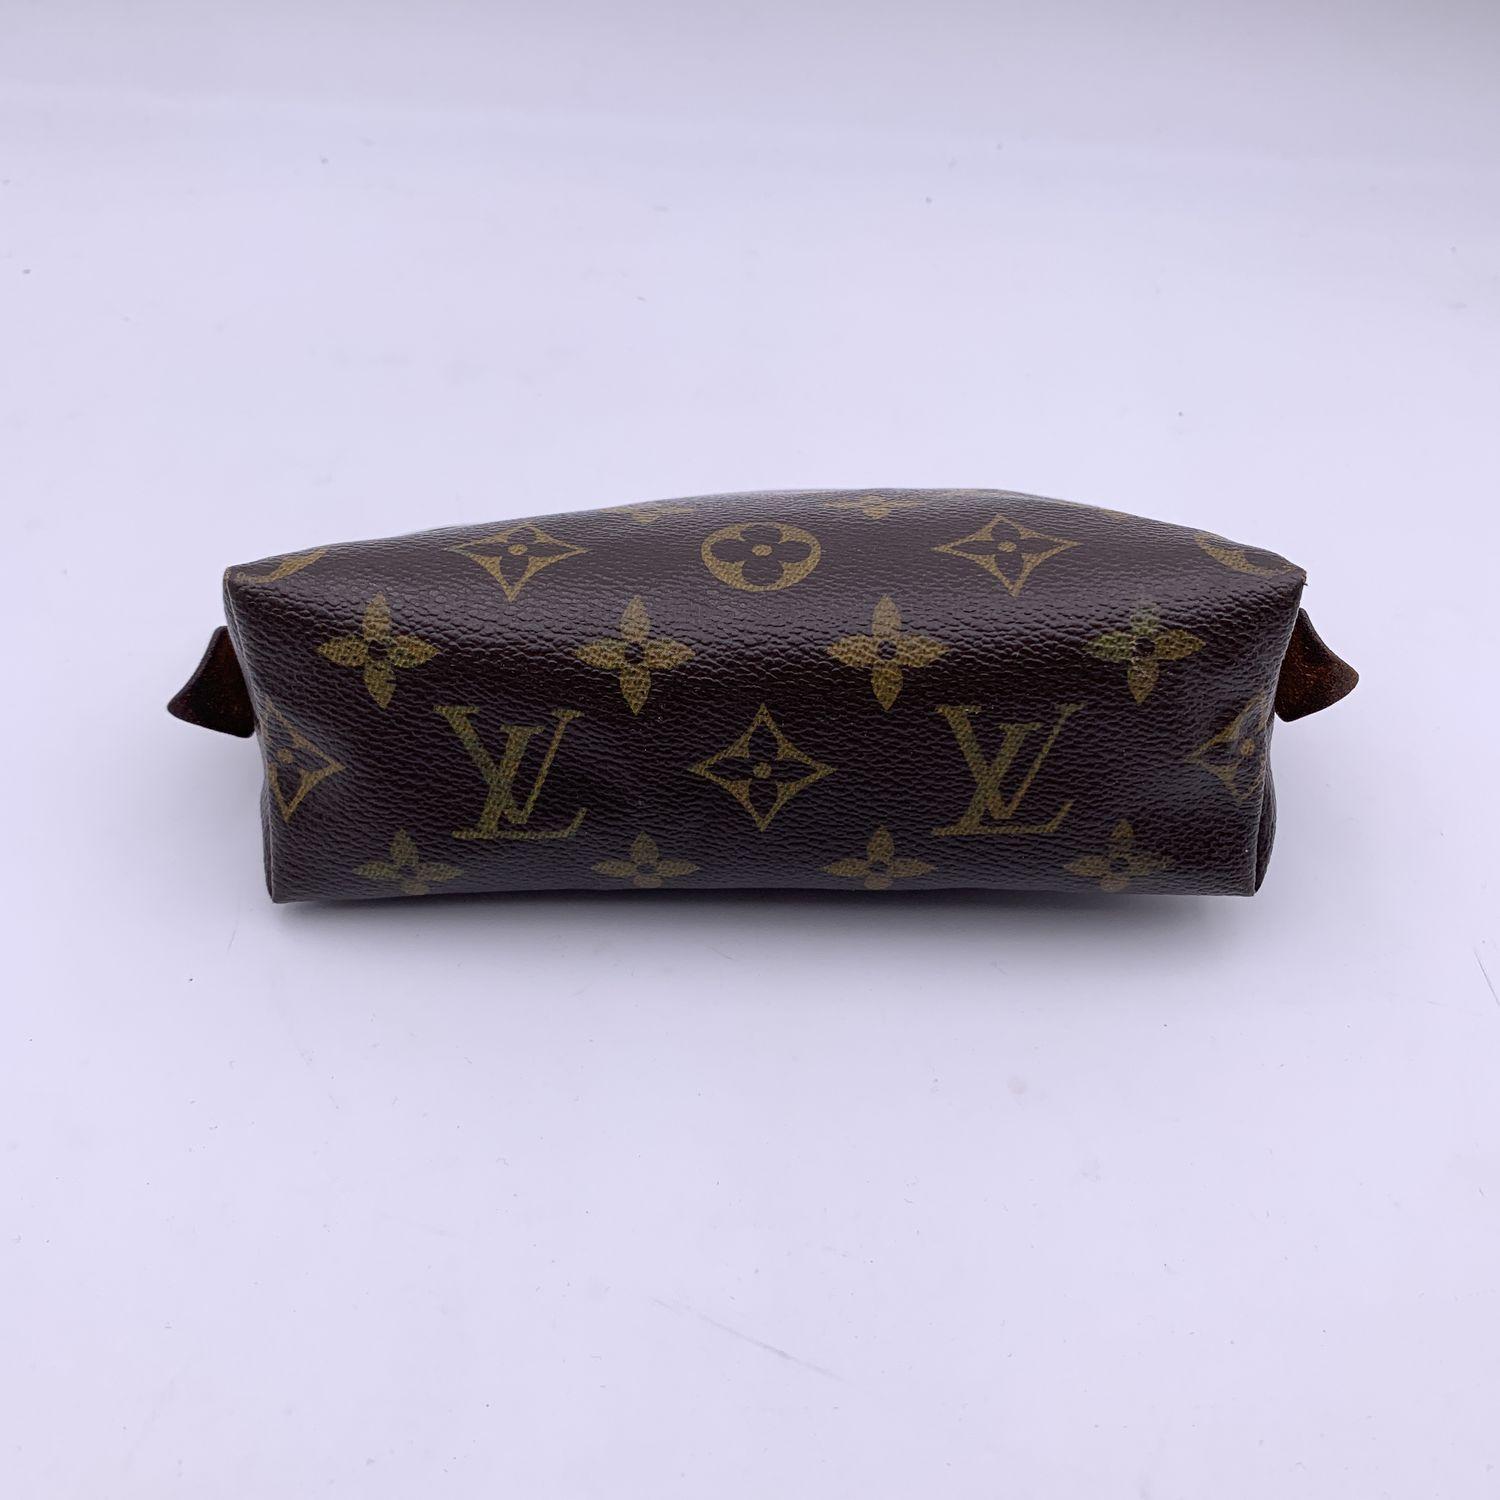 Louis Vuitton 'Pochette Cosmetique' cosmetic pouch in timeless monogram canvas. Upper zipper closure. 1 side open pocket inside. 'LOUIS VUITTON Paris - Made in Spain' engraved on leather piece on the side. Serial number inside

Condition

A -